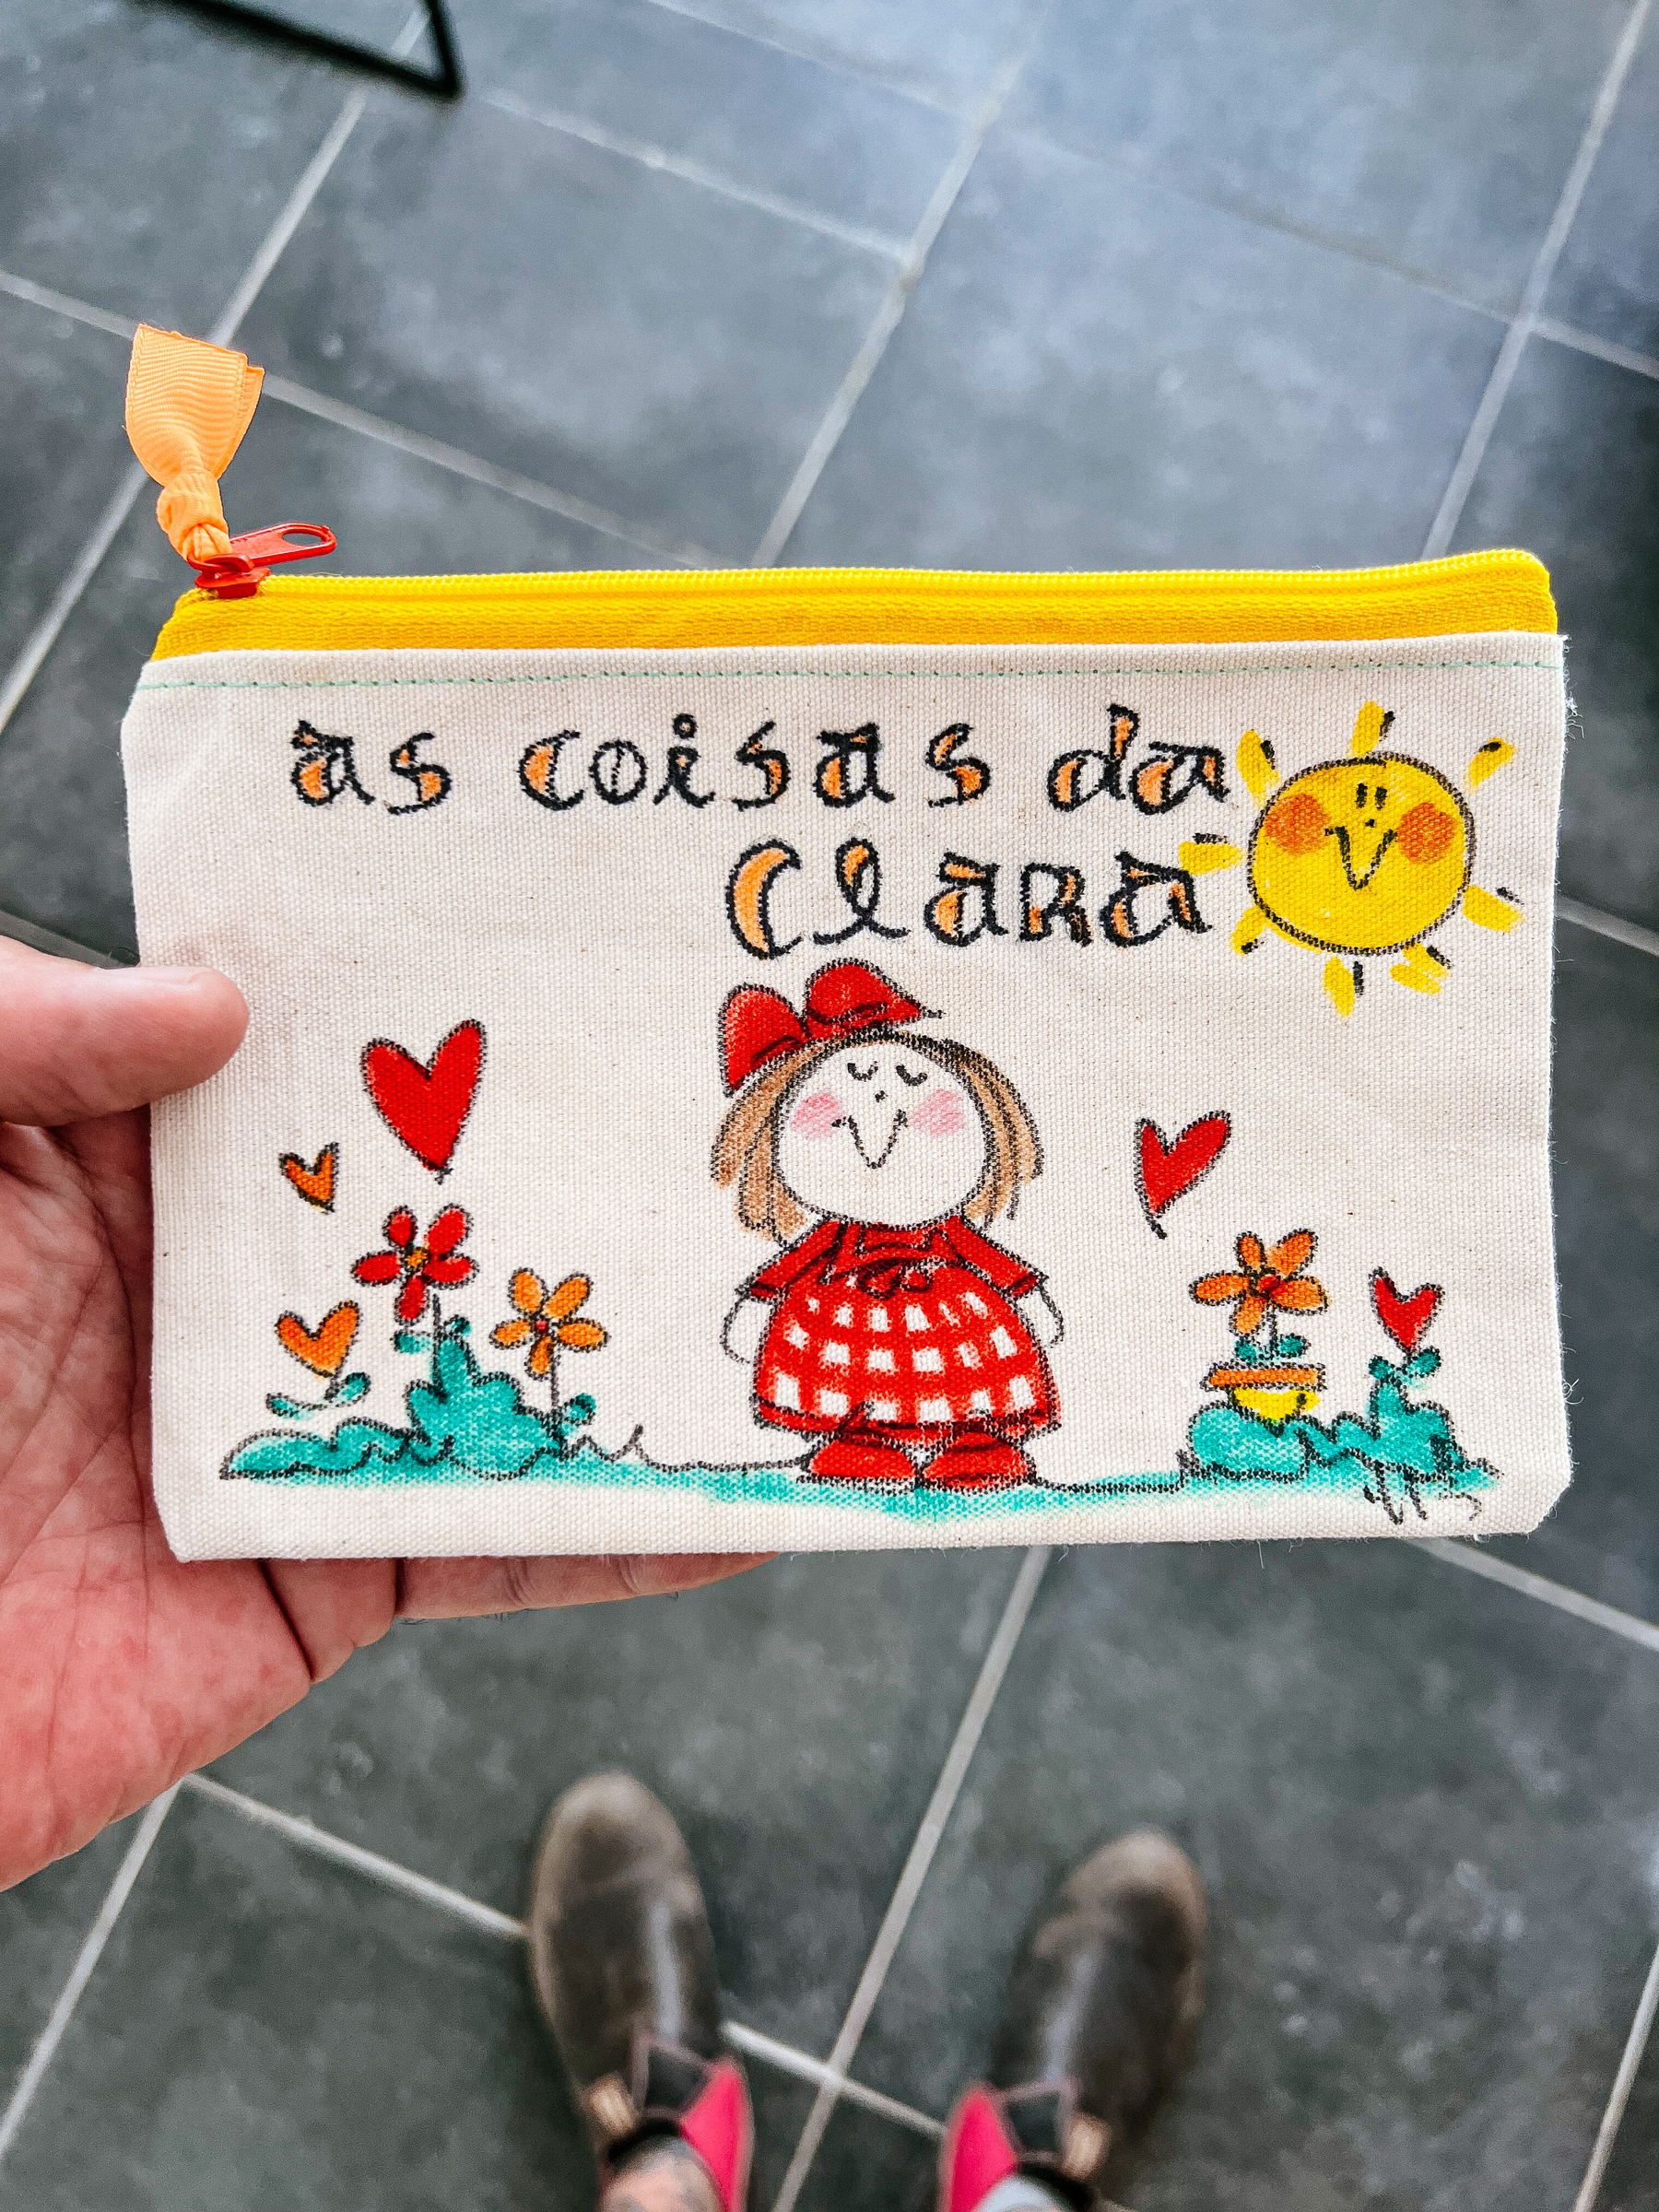 a purse with &ldquo;Clara&rsquo;s things&rdquo; written on it